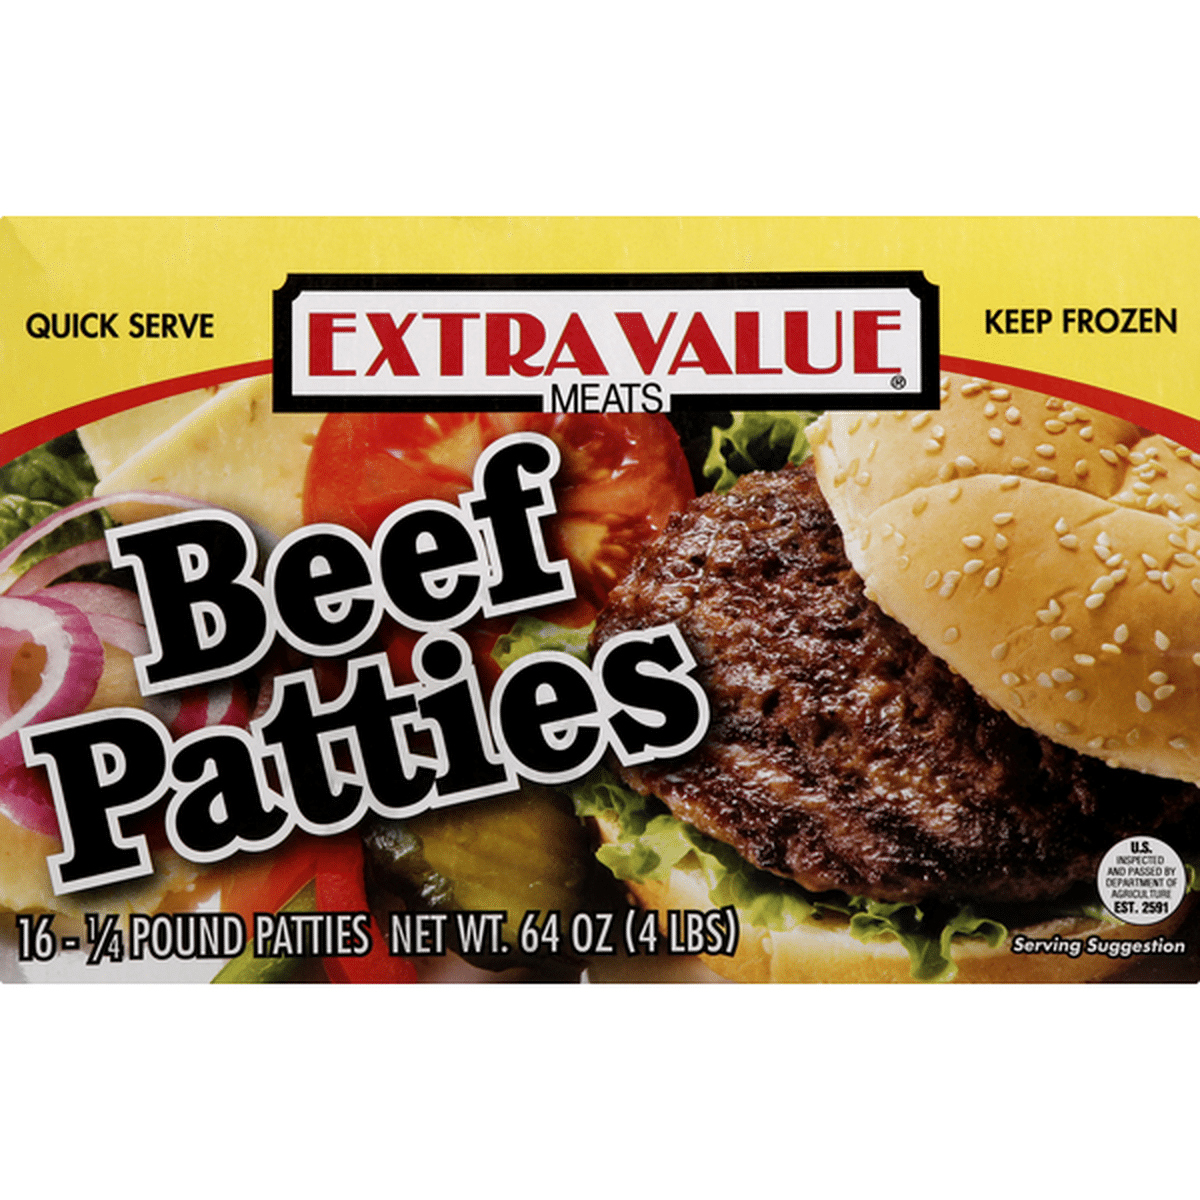 Extra Value Quarter Pound Beef Patties, 20 Count, 5 lbs, Dairy-Free,  (Frozen)